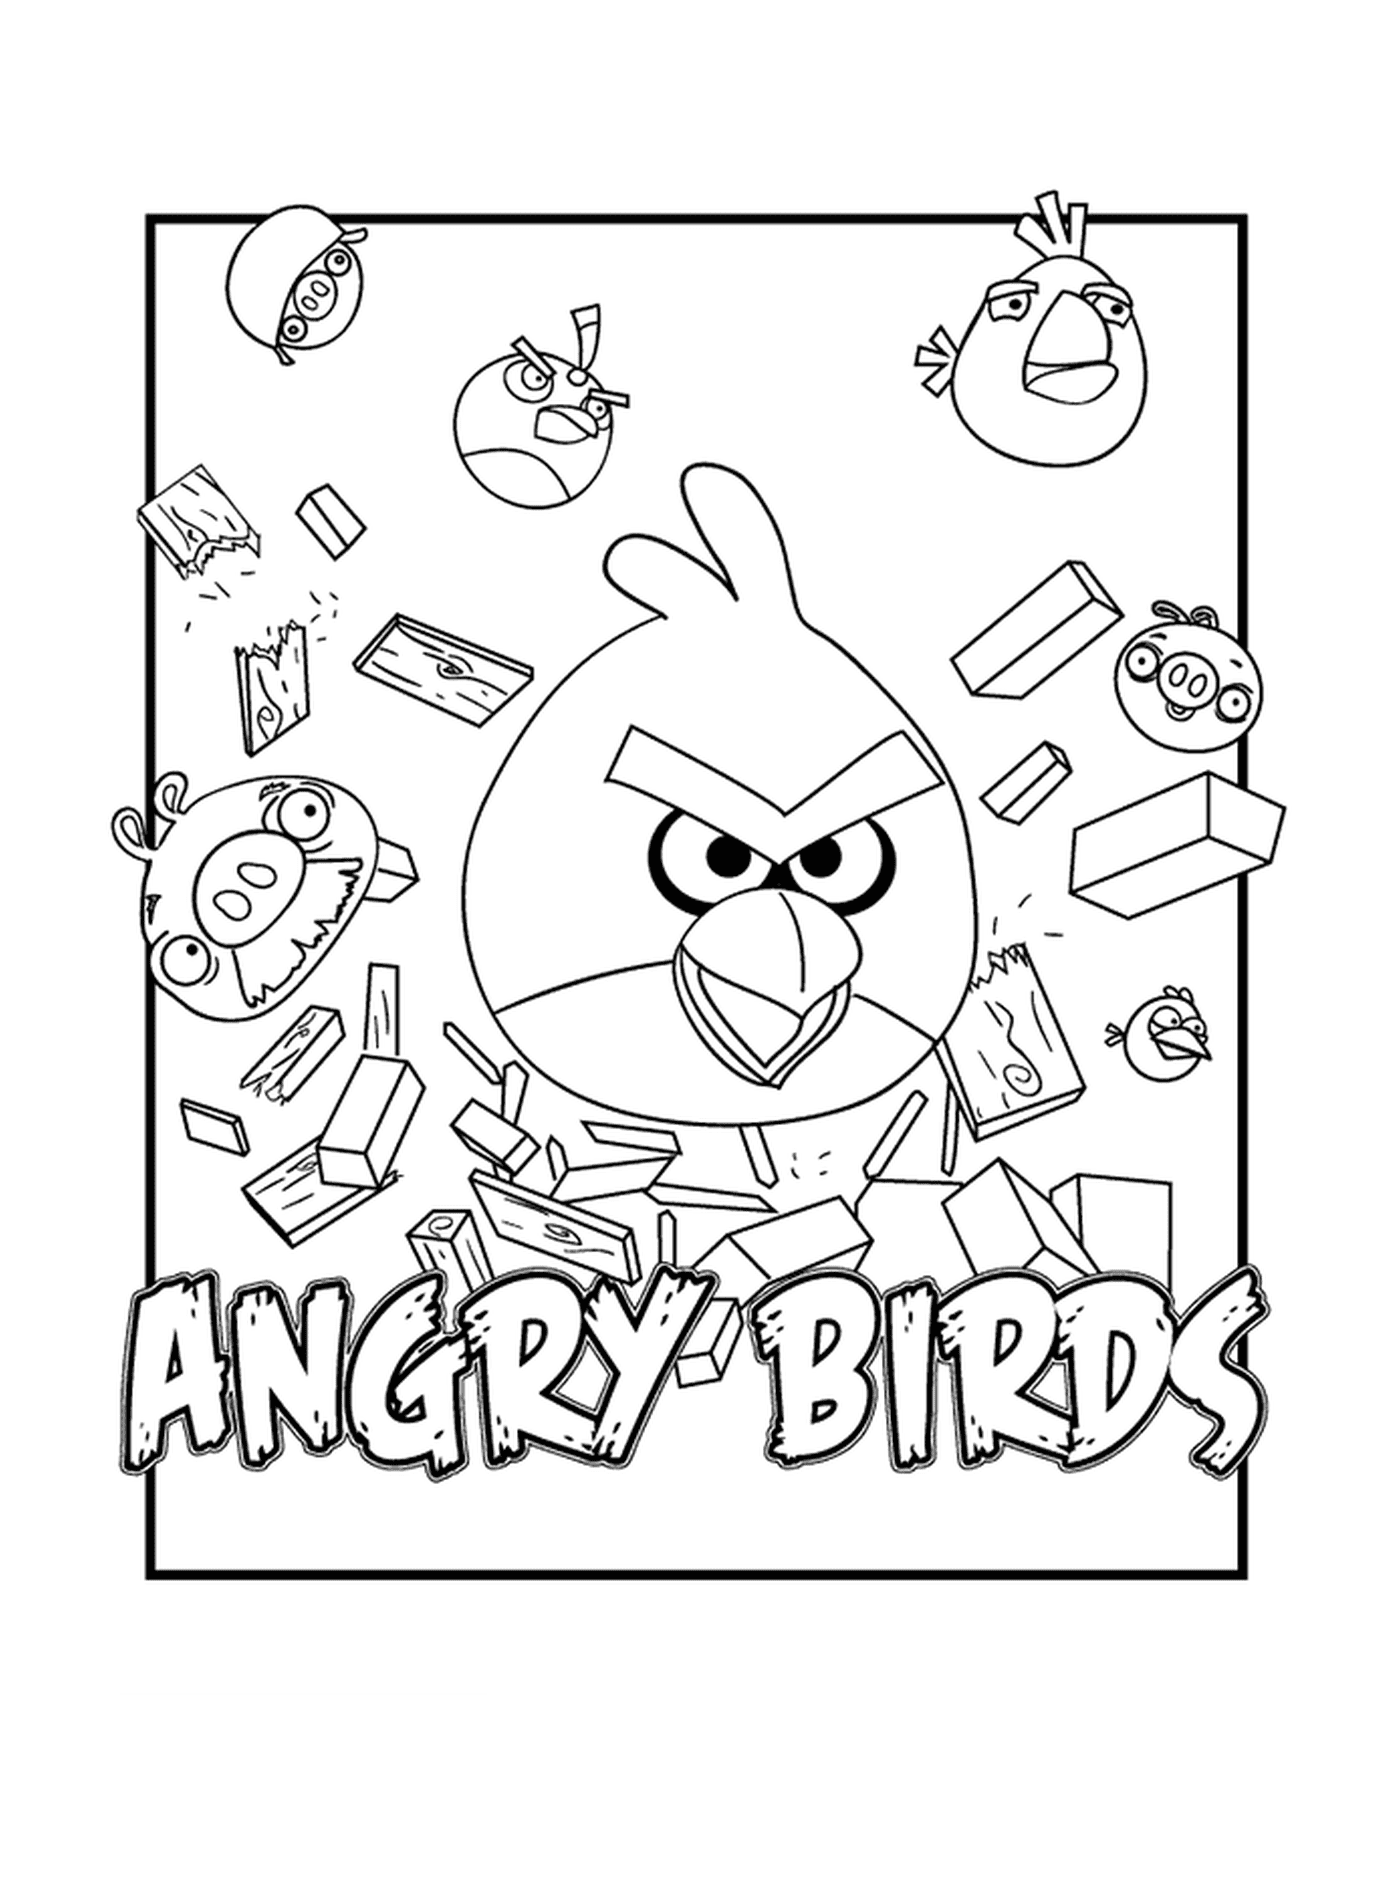  A picture of Angry Birds that breaks everything 